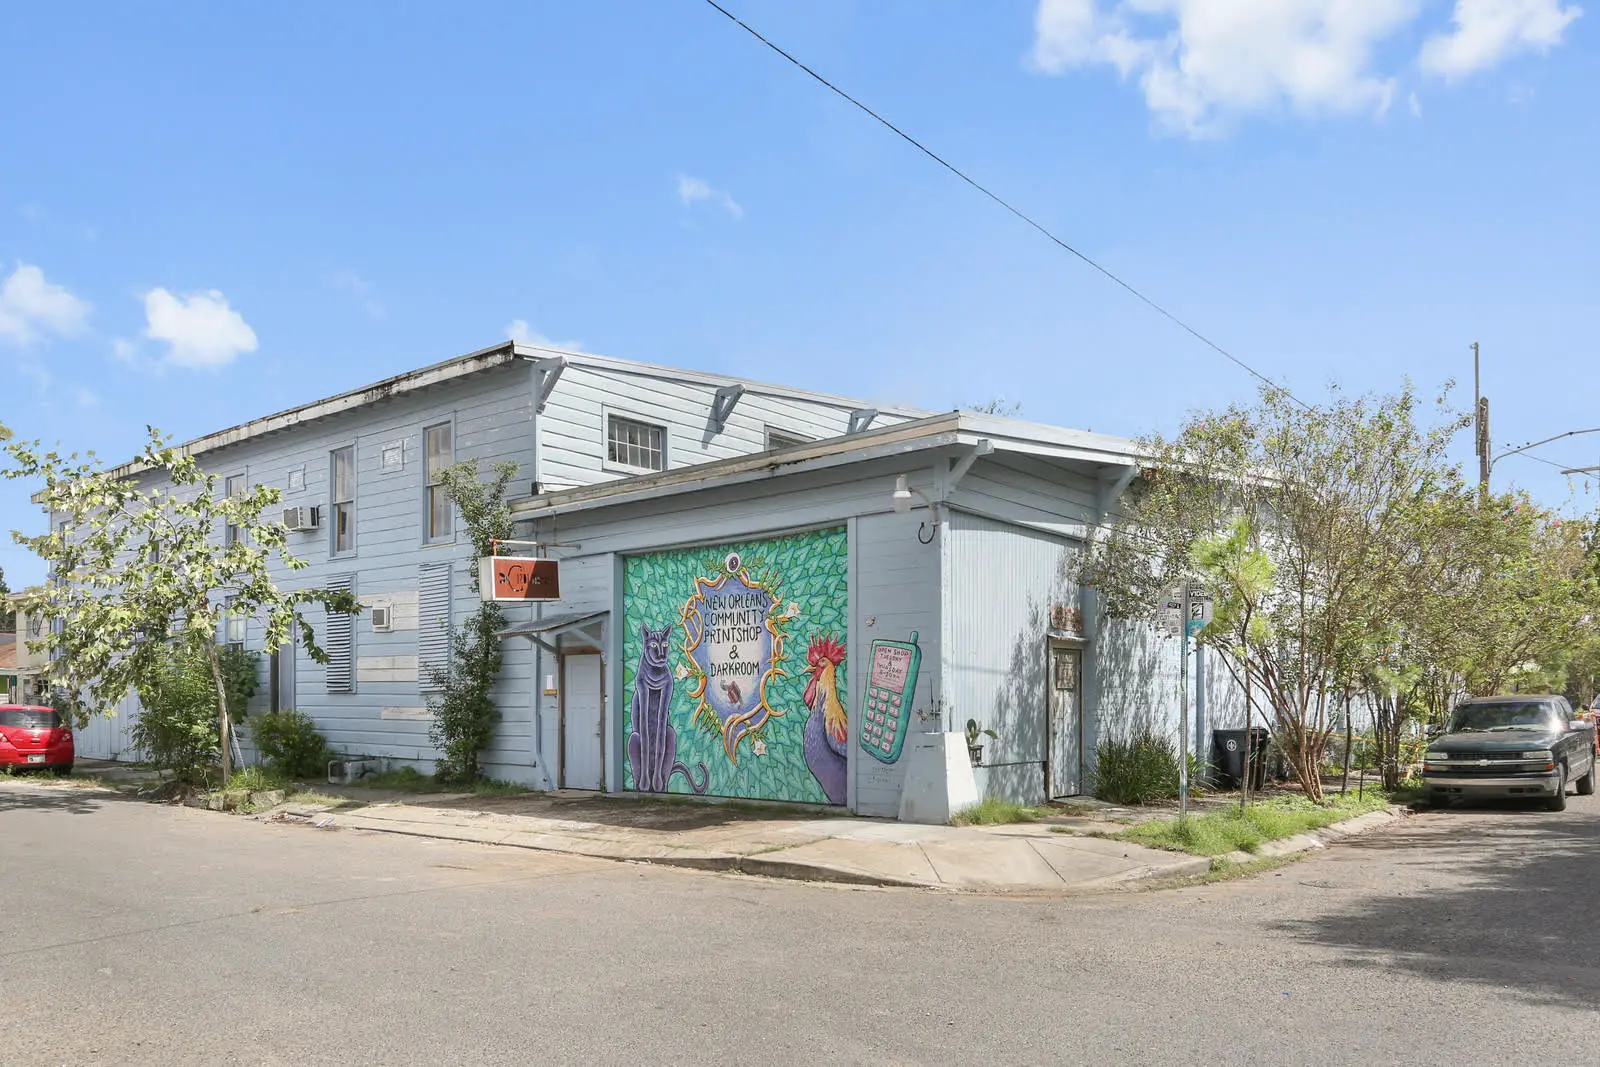 A Bywater Renaissance Warehouse: An Interview with Tim Wolff